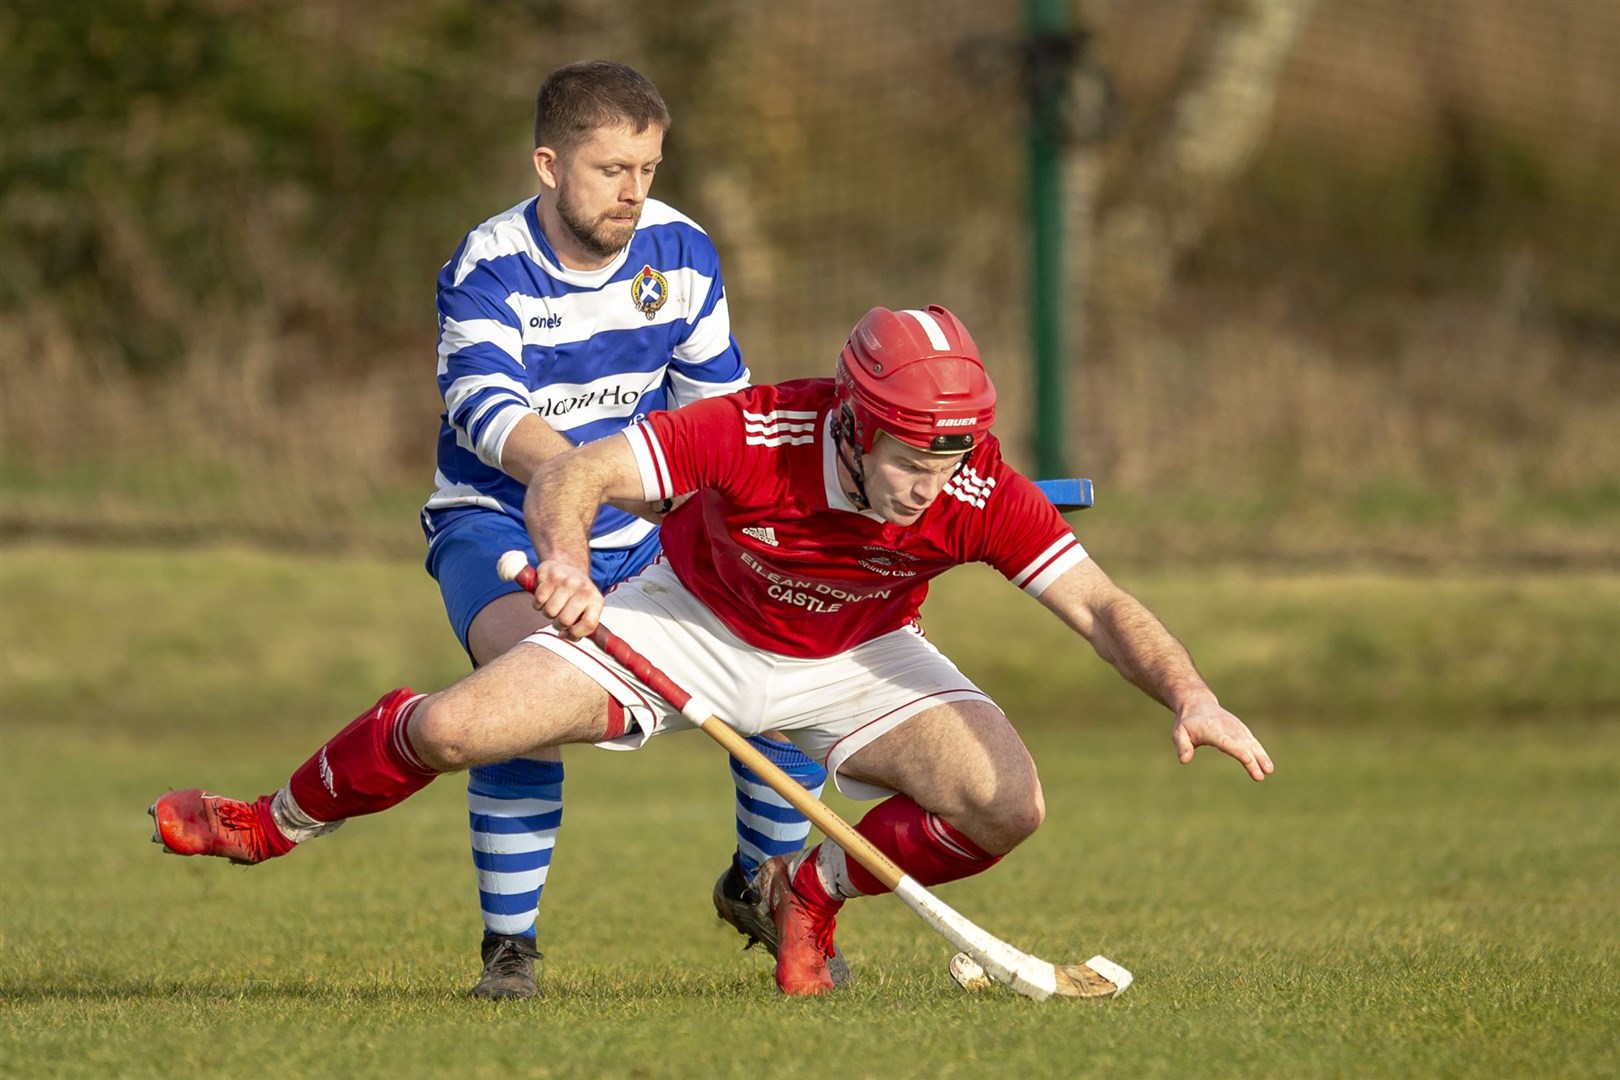 Darrin Fowler (Newtonmore) with Keith Macrae (Kinlochshiel) earlier in the opening fixture of the MOWI Premiership season played at Rearaig, Balmacara. Picture: Neil Paterson.